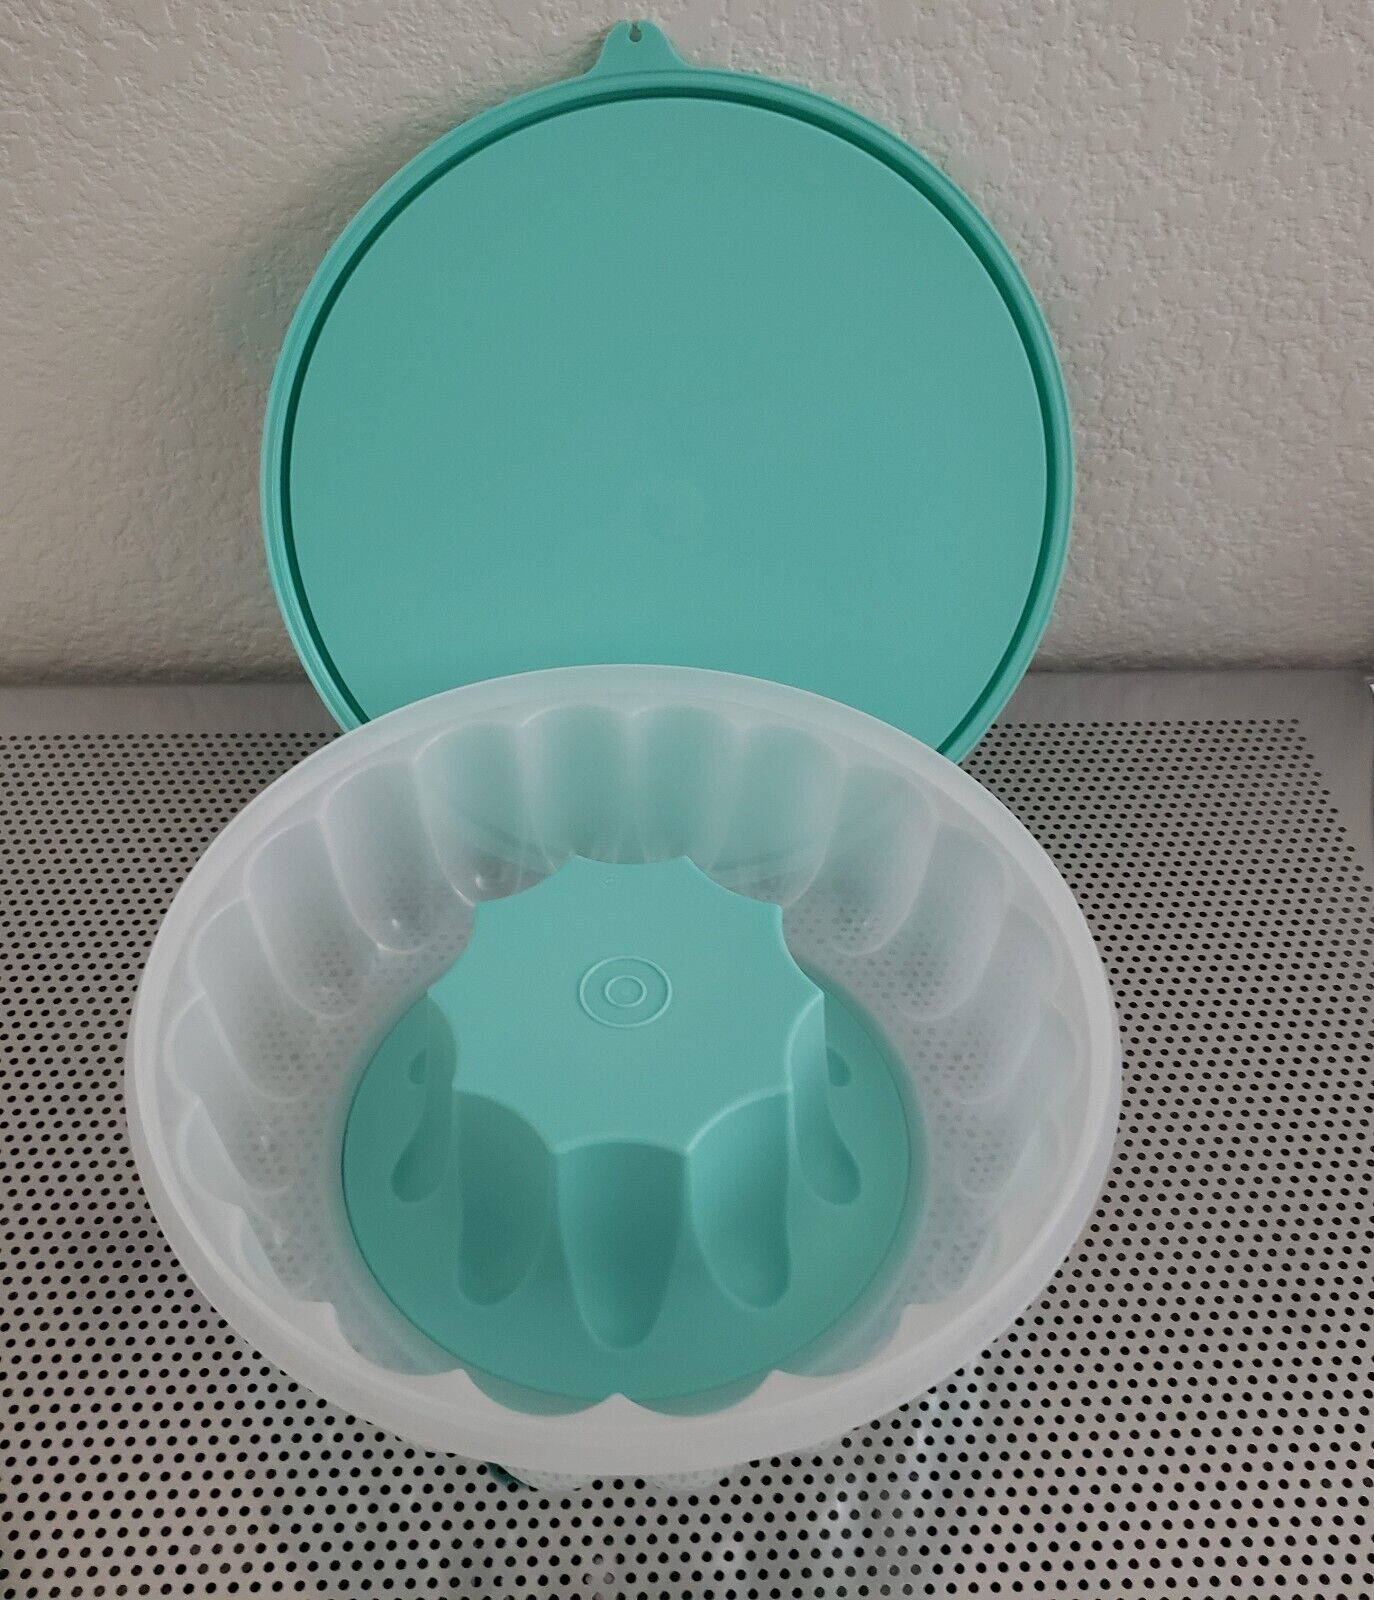 Tupperware Bundt Cake / Jello Mold Container - 3 Piece Mint Green & Clear